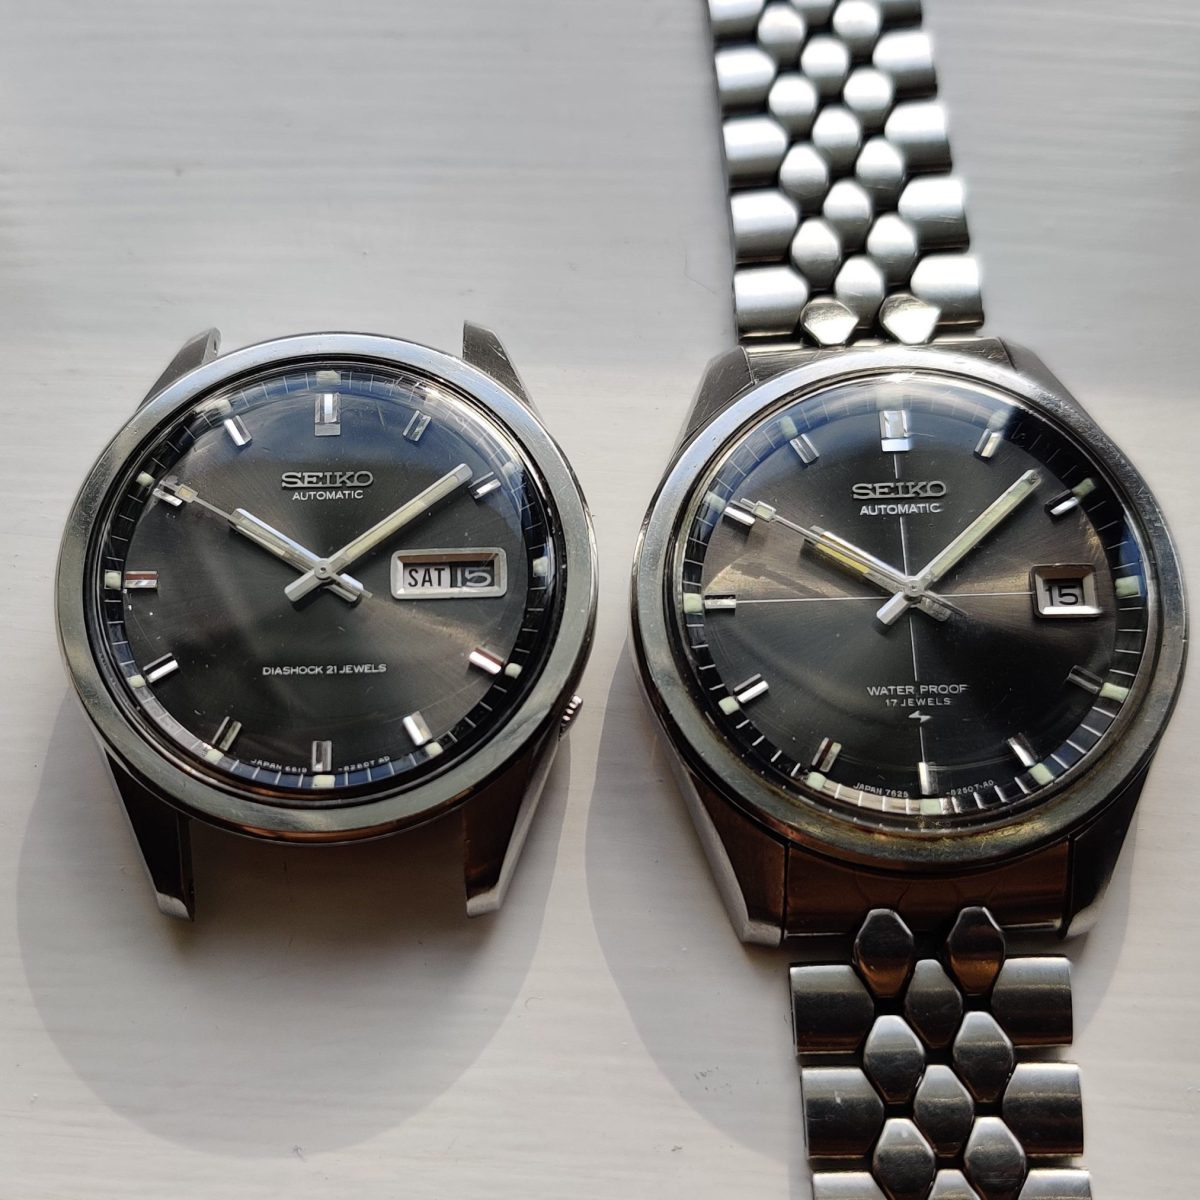 Brothers from another mother – Vintage Watch Advisors